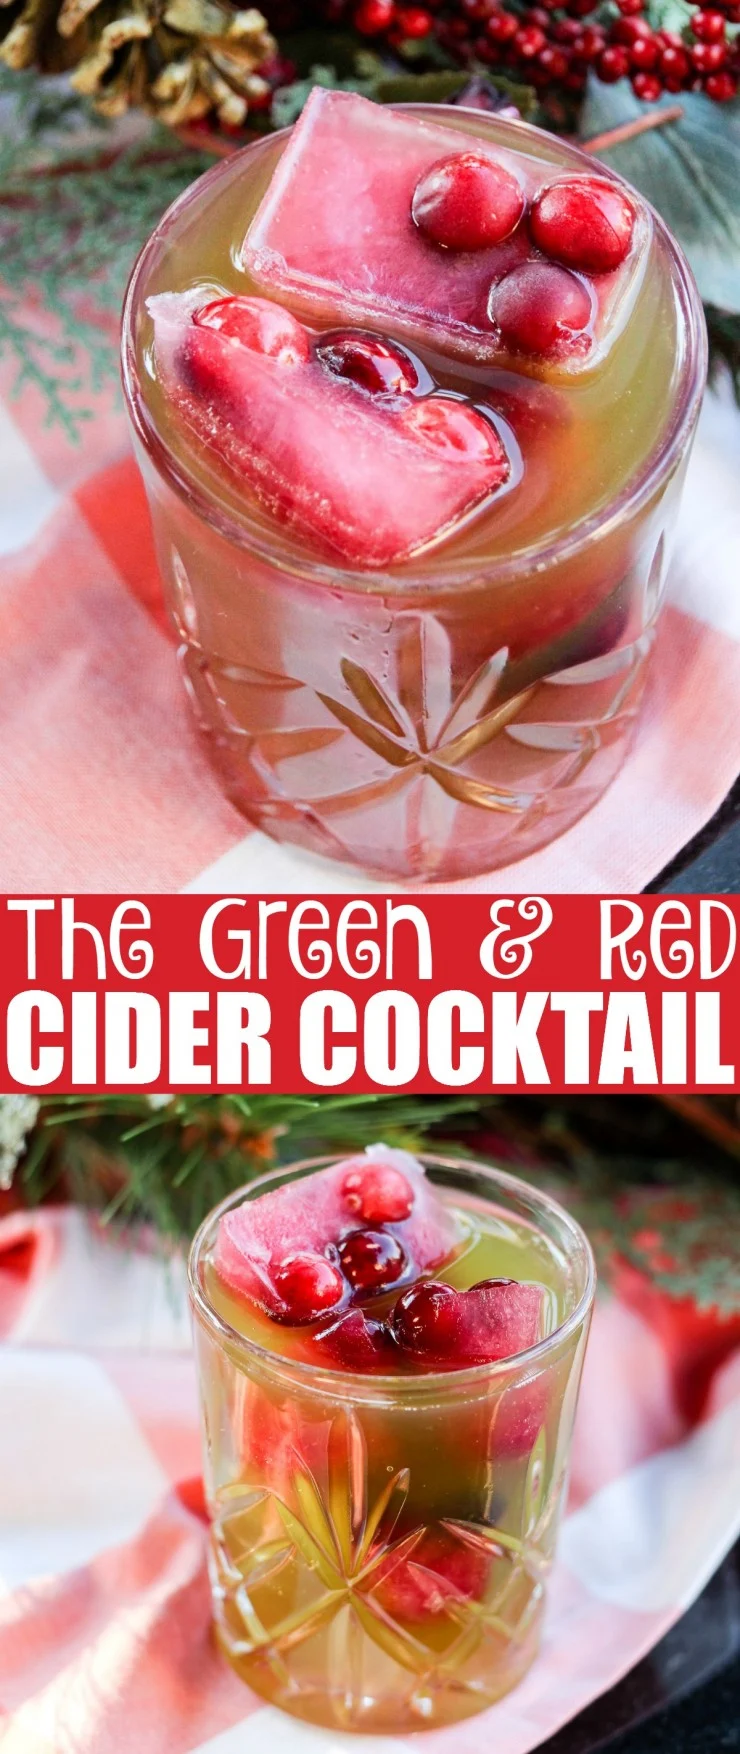  This The Green & Red Cider Cocktail with Cran-Apple Ice Cubes is a fun and flavourful cocktail perfect for holiday entertaining. Change things up from the usual with this tasty beverage! The red and greeen colours make it the perfect Christmas drink.